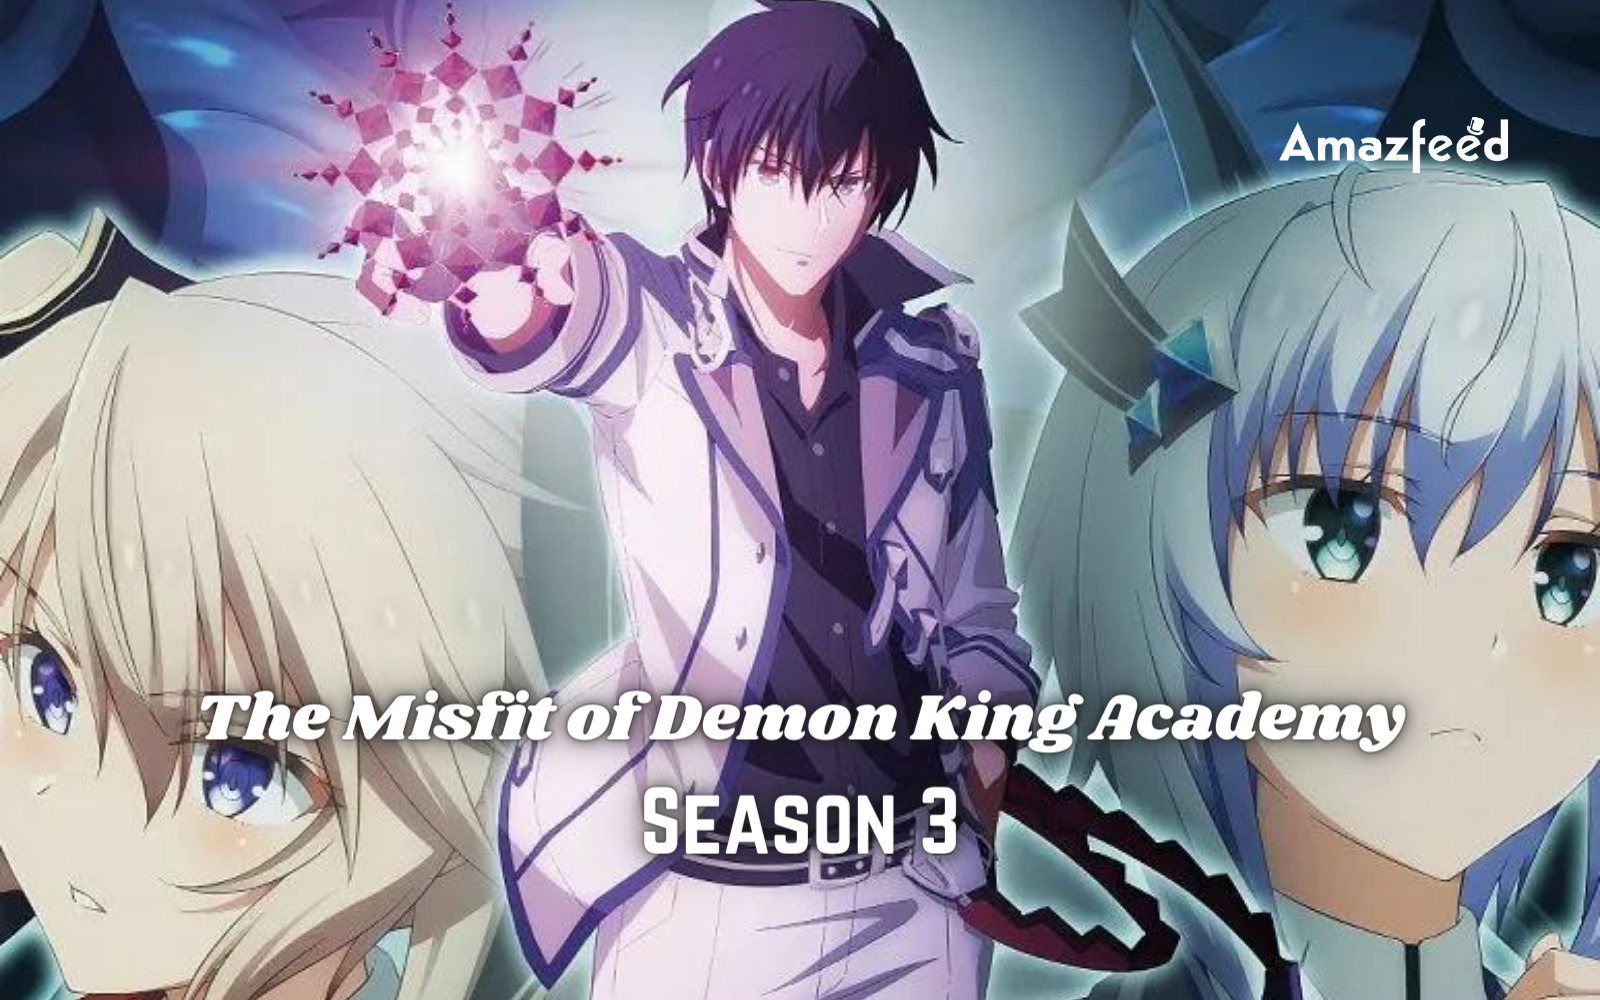 The Misfit of Demon King Academy Season 3 ⇒ Release Date, News, Cast,  Spoilers & Updates » Amazfeed